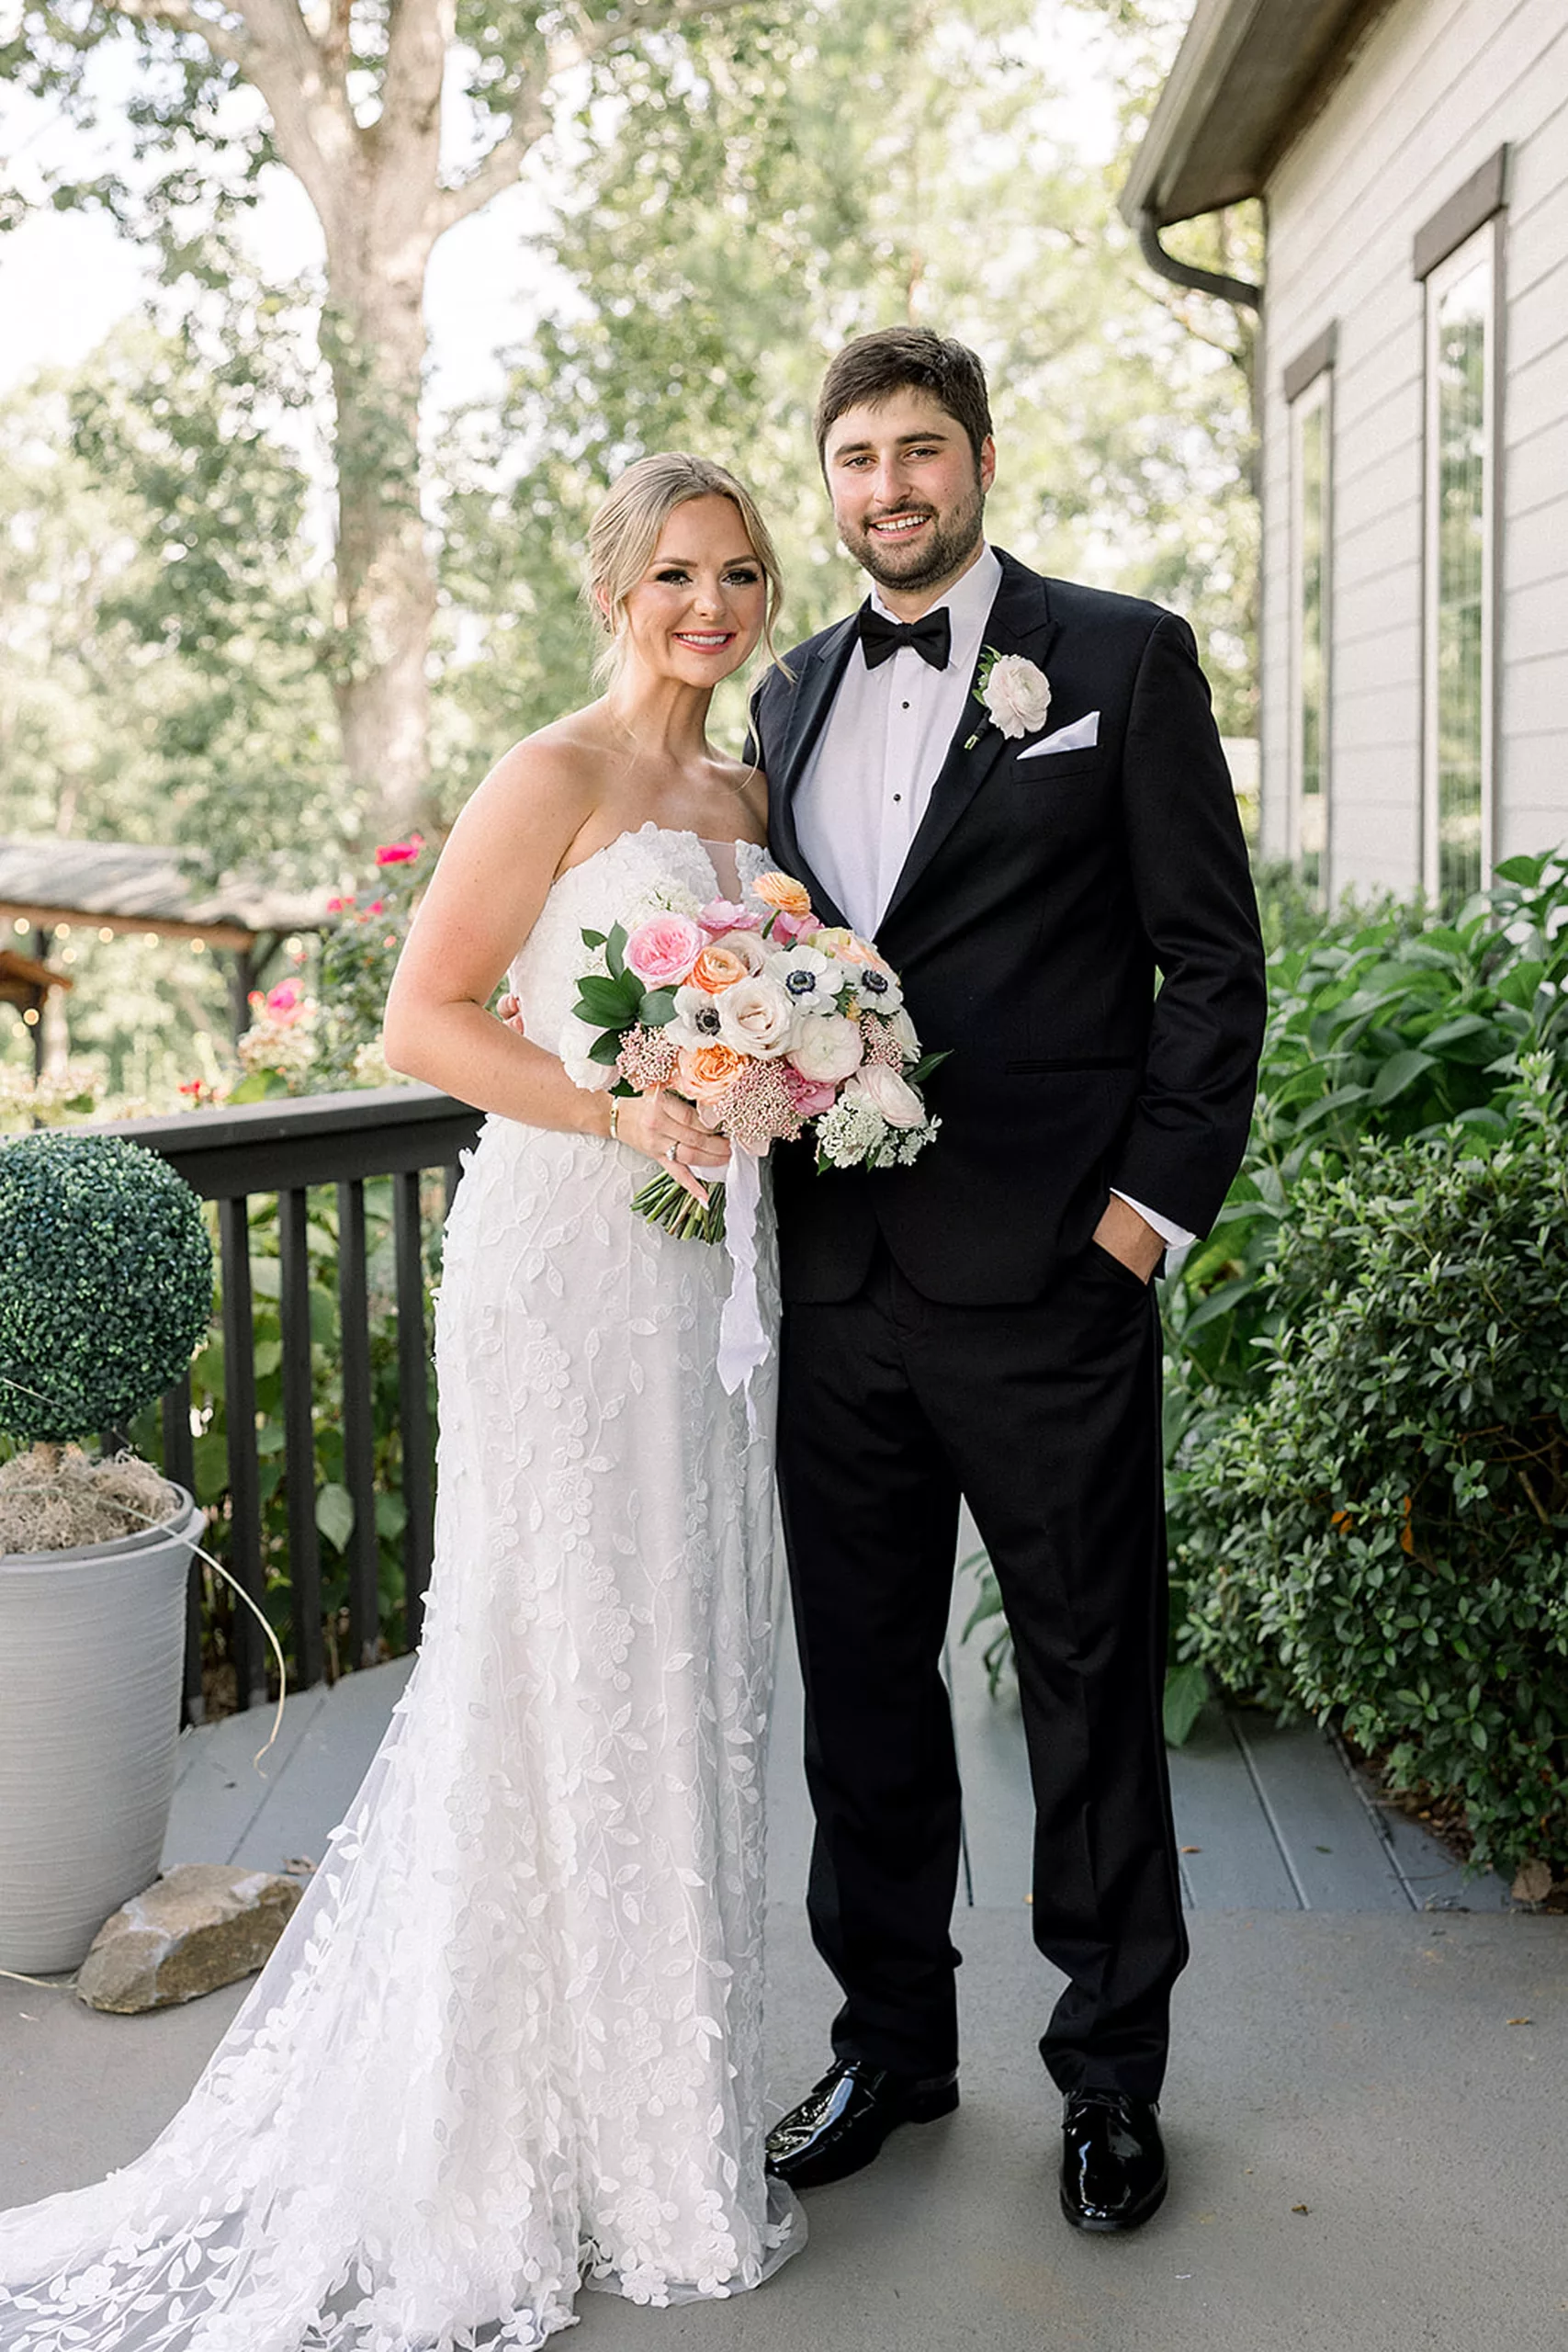 Newlyweds wrap their arms around each other while standing on a porch